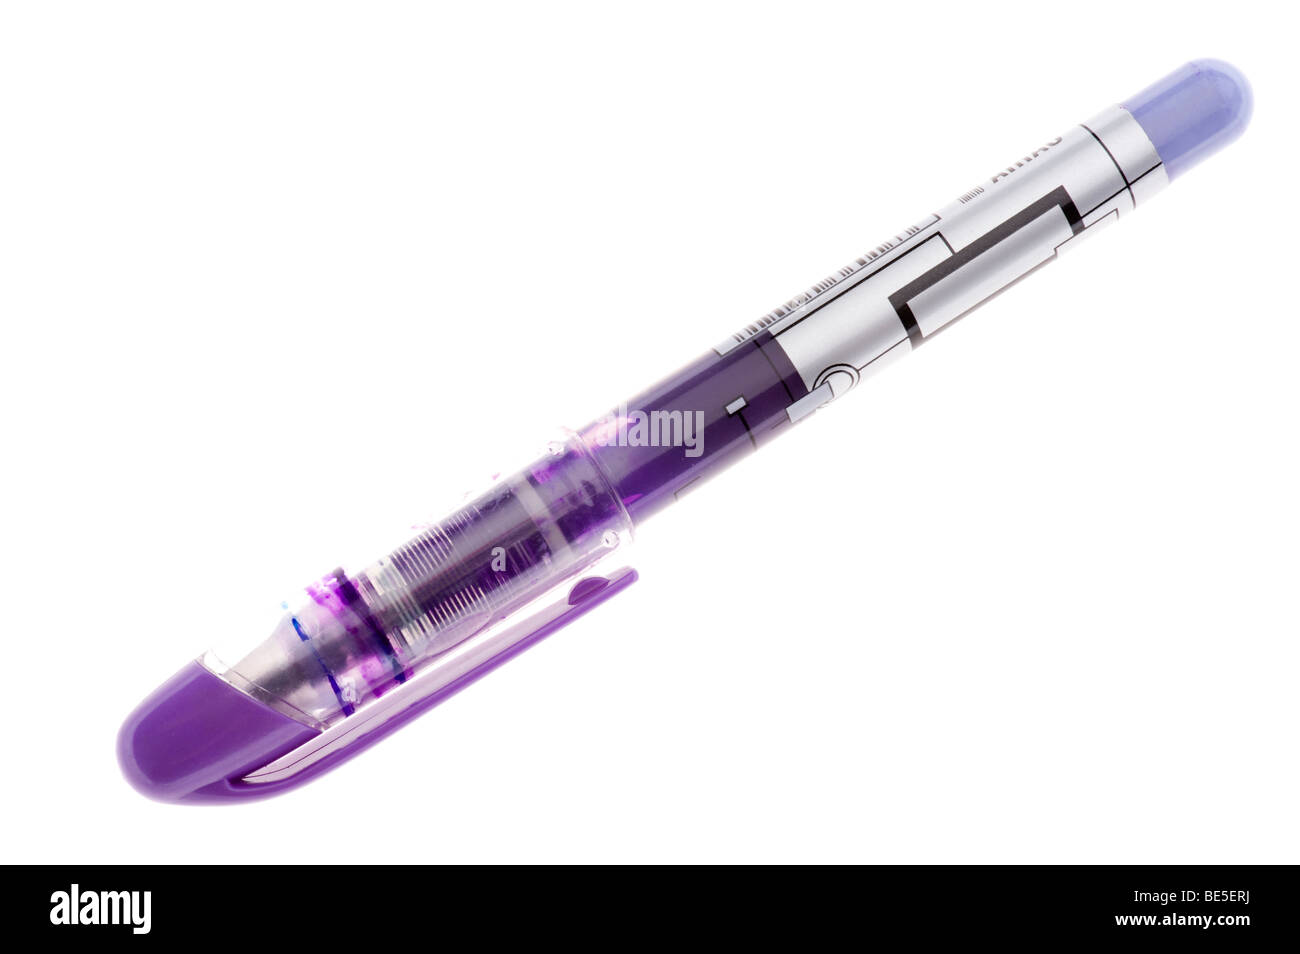 object on white - fluorescent marker close up Stock Photo